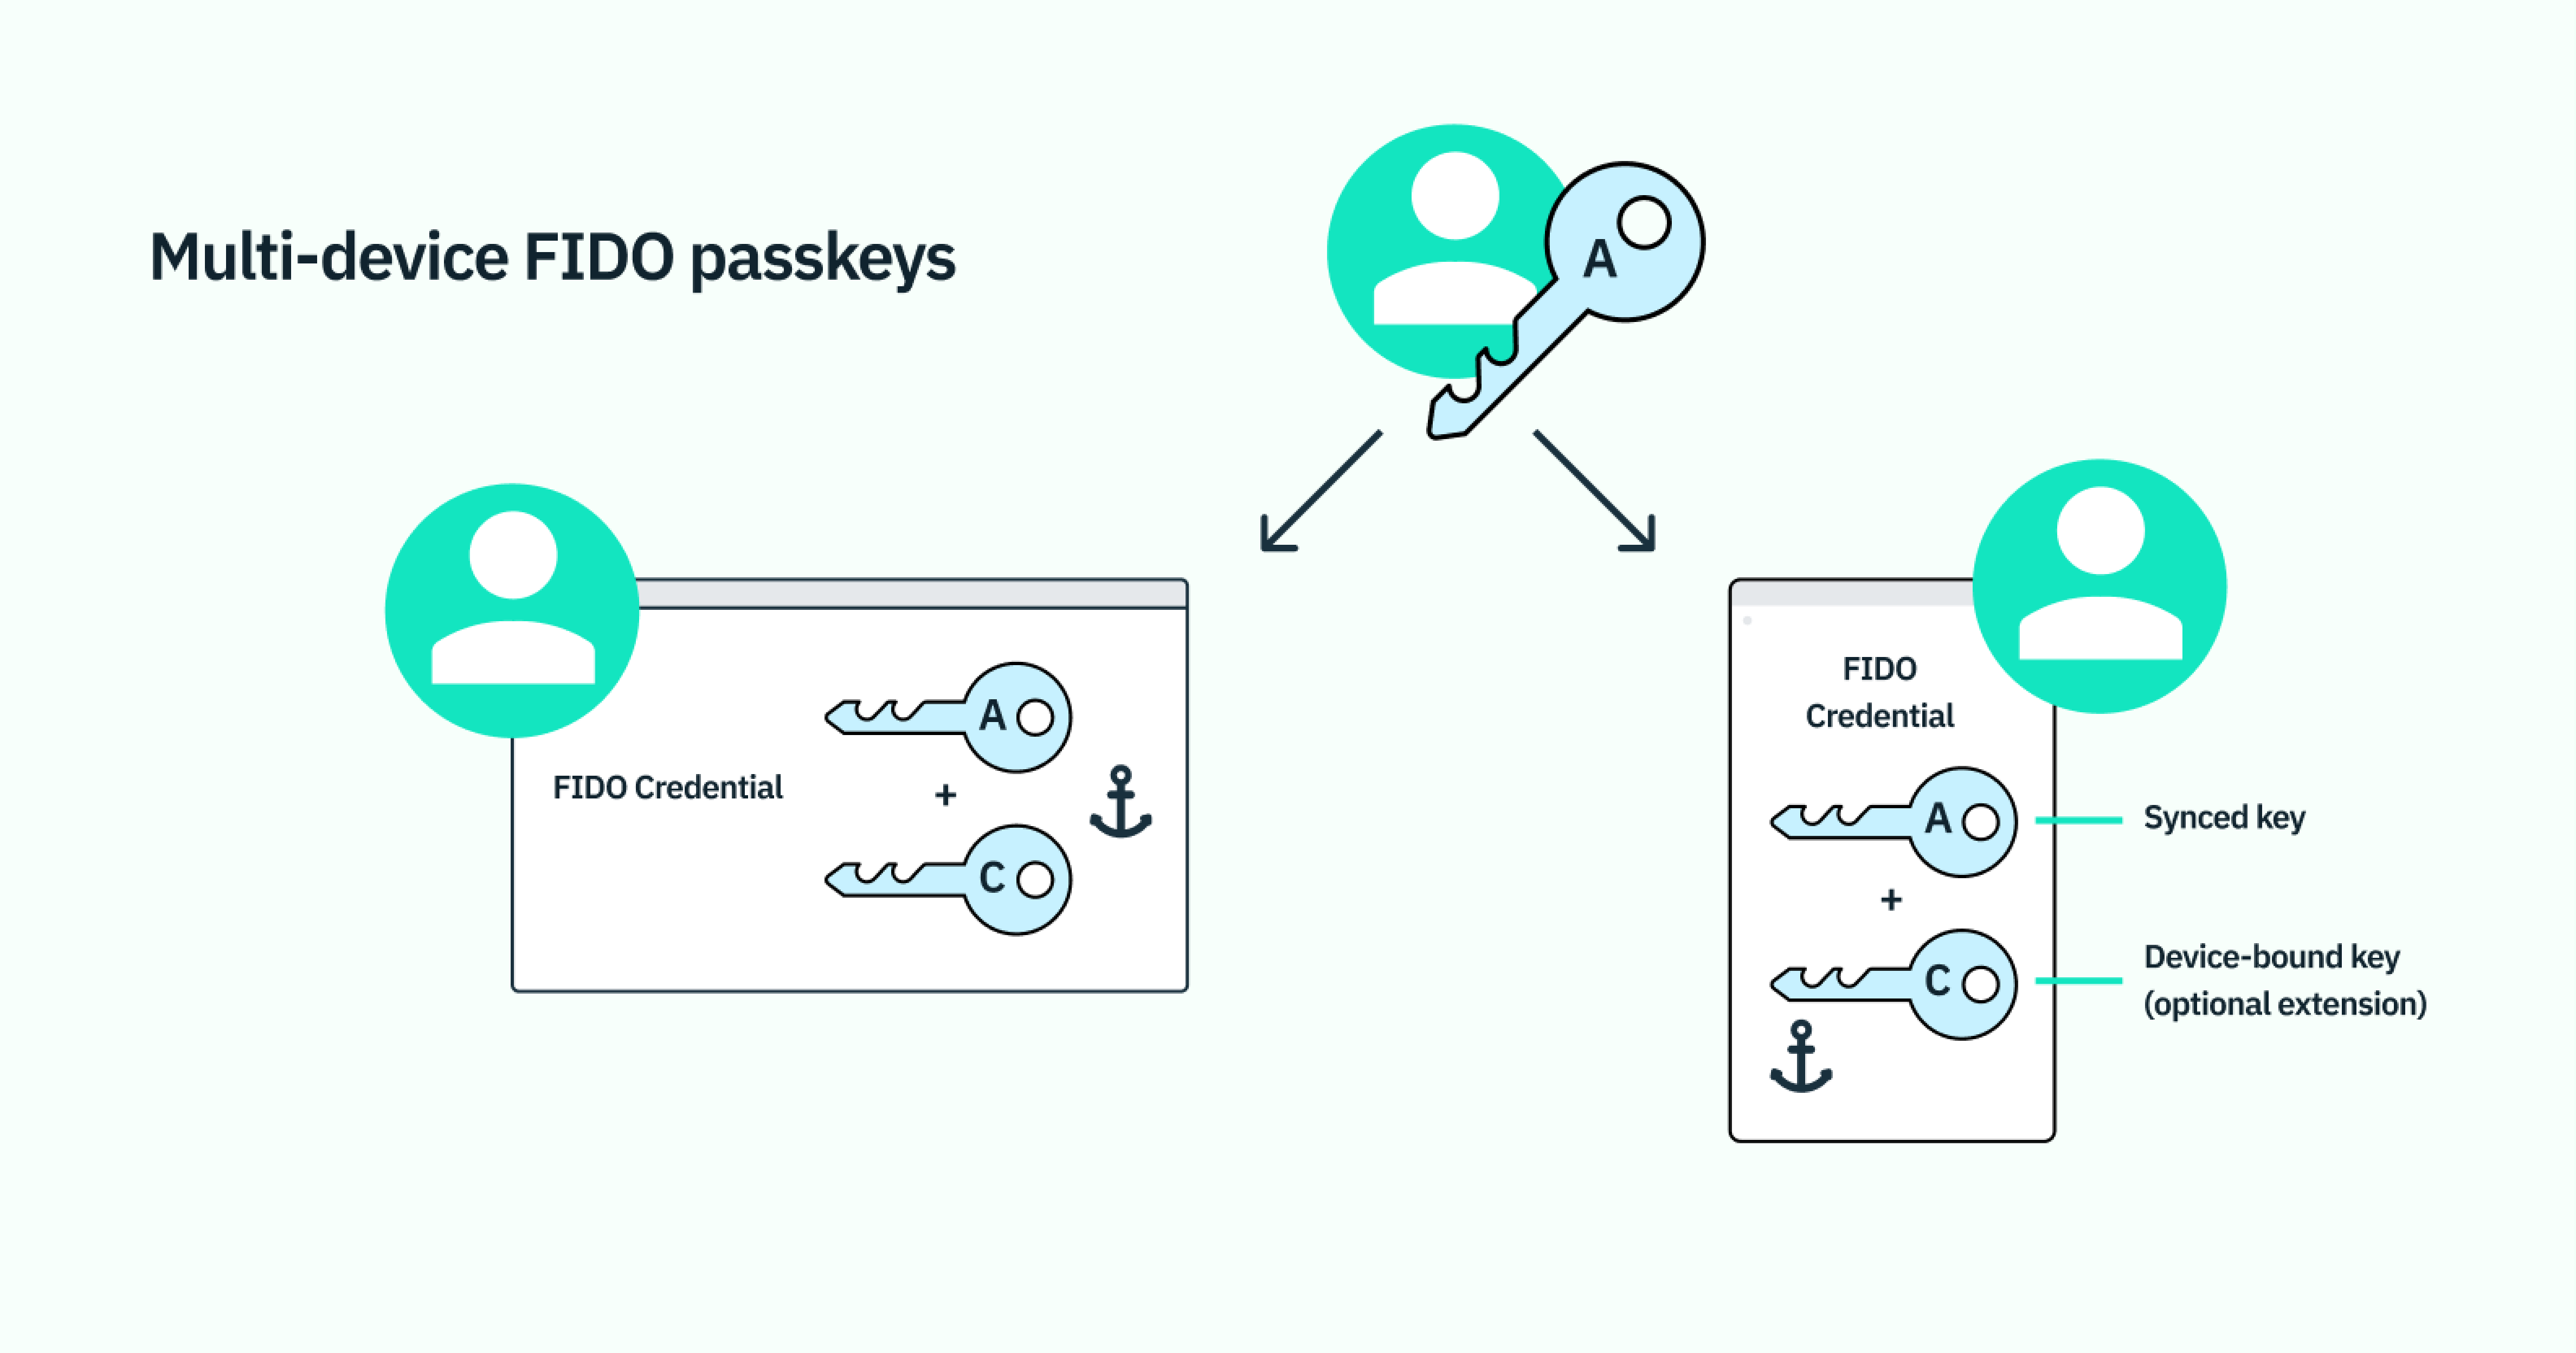 A diagram of multi-device FIDO passkeys and how they use public key cryptography